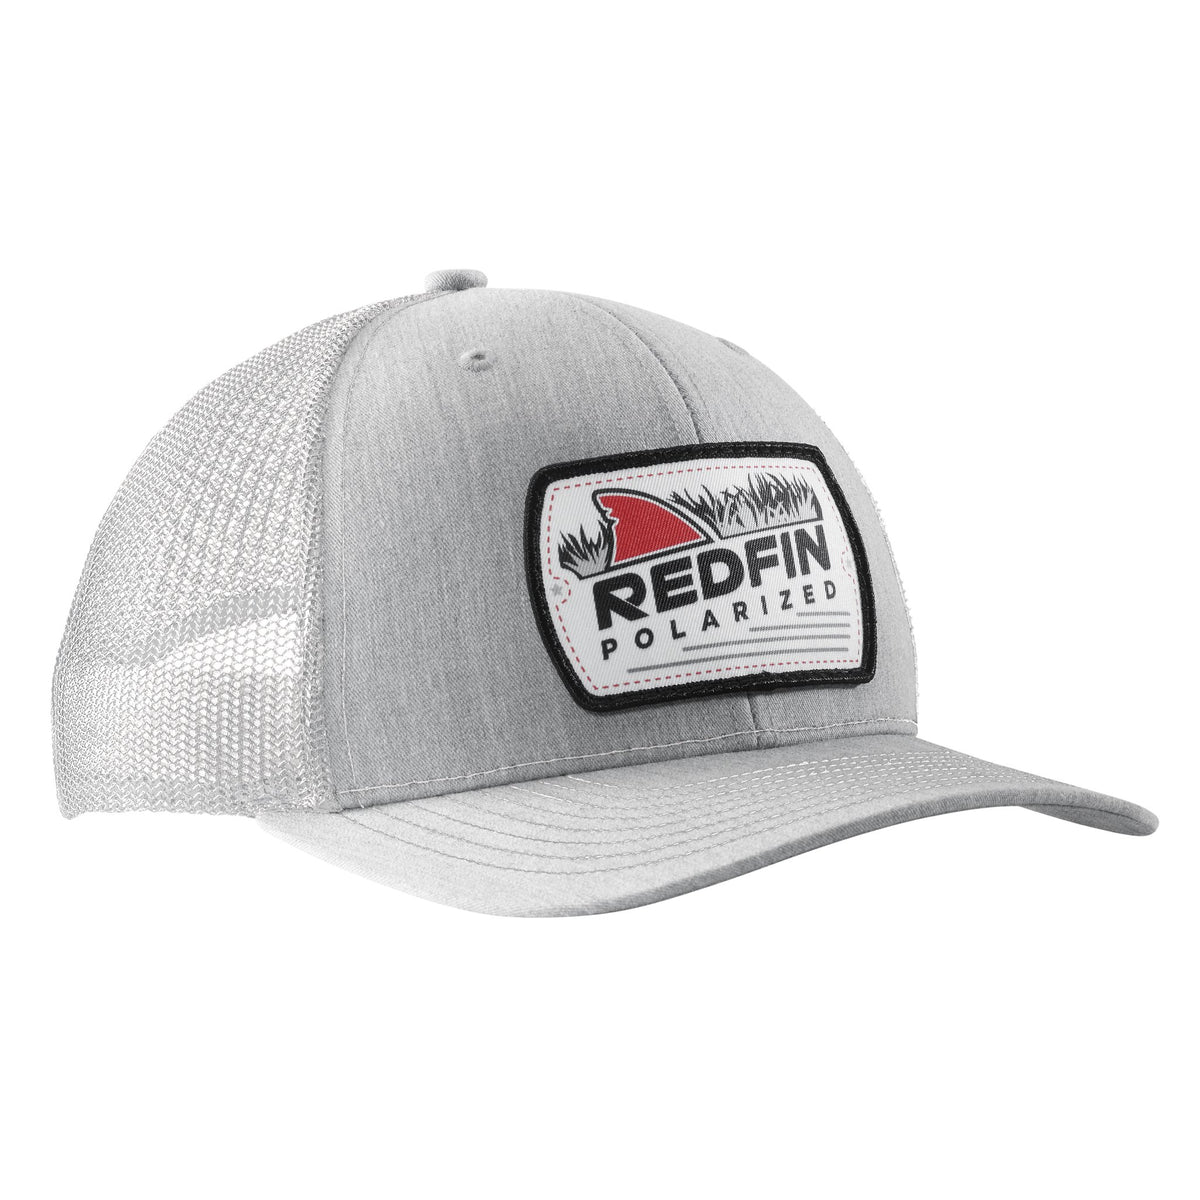 RedFin Pro Select Patch Hat - RedFin Polarized